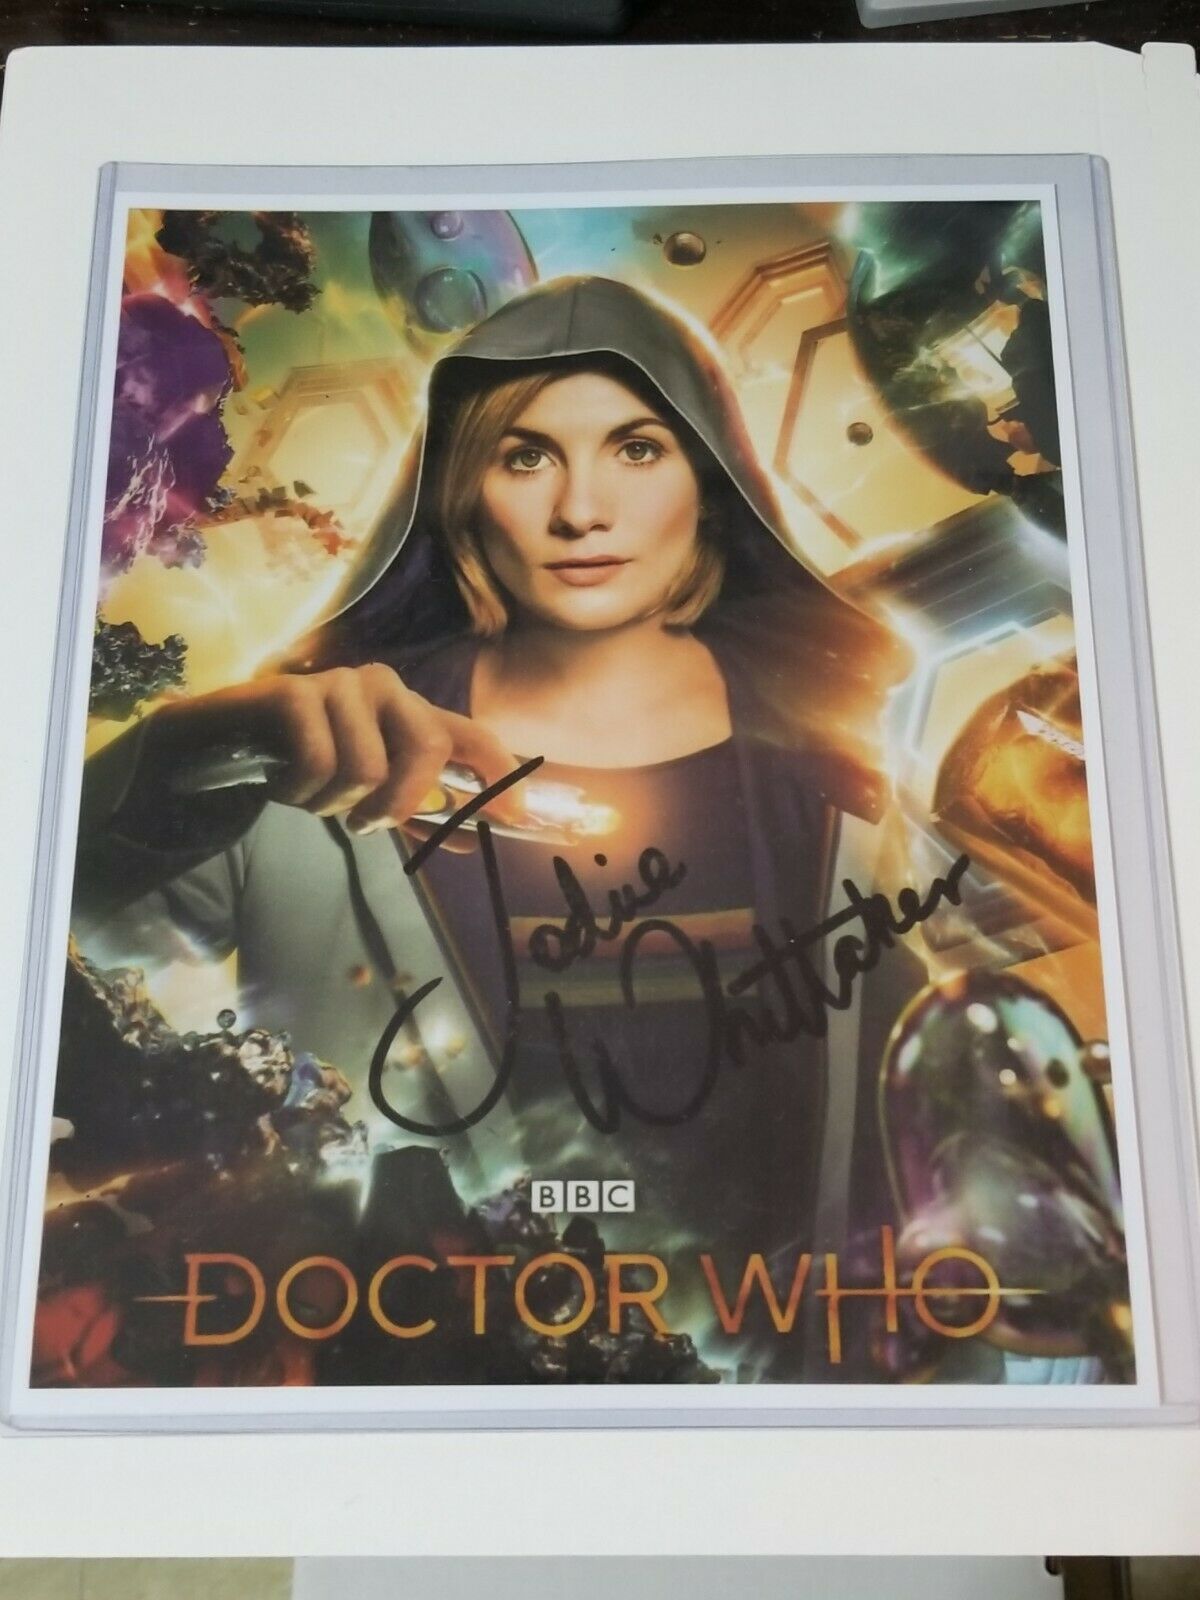 Dr. Who Signed 8x10 Photo Rp - Free Shipping!